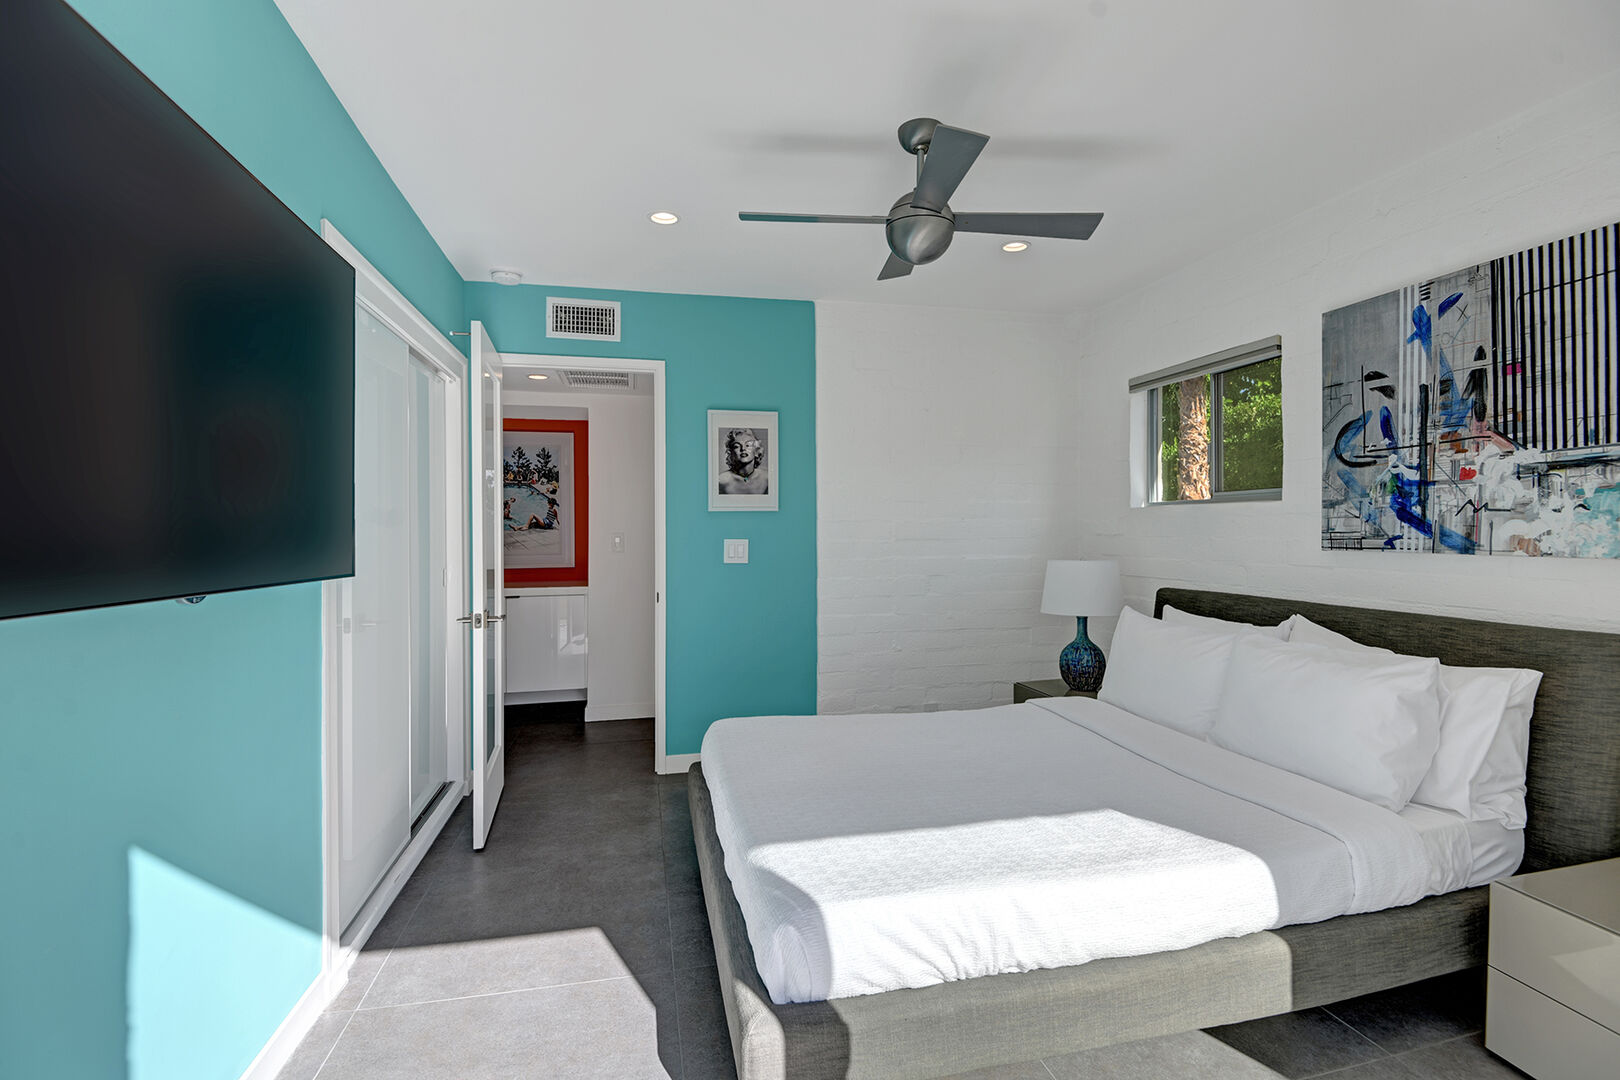 BEDROOM #3 WITH ACESS TO OUTDOOR SPACE, CELING FAN, AND SMART TV